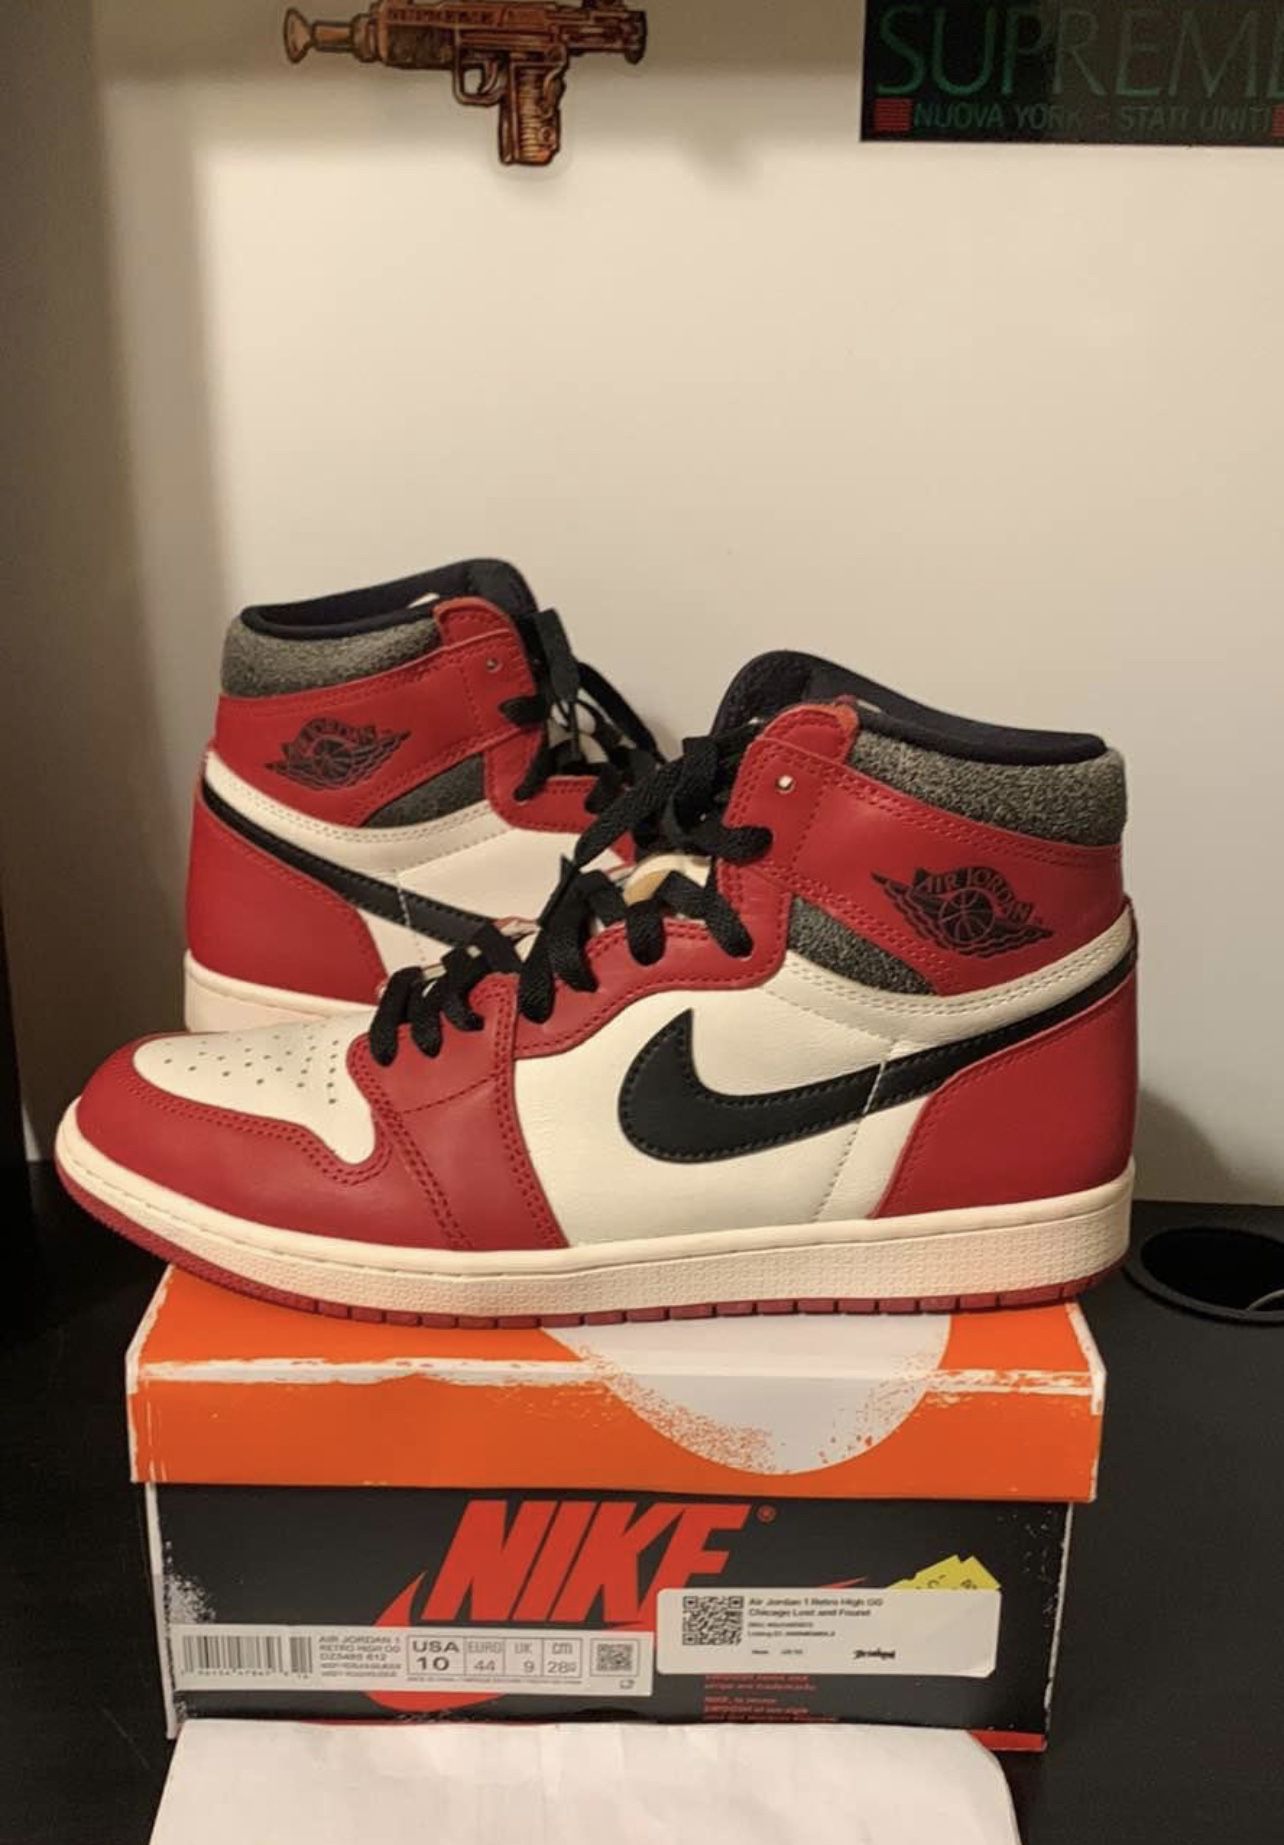 Jordan 1 Lost and Found Size 7 for Sale in Fountain Valley, CA